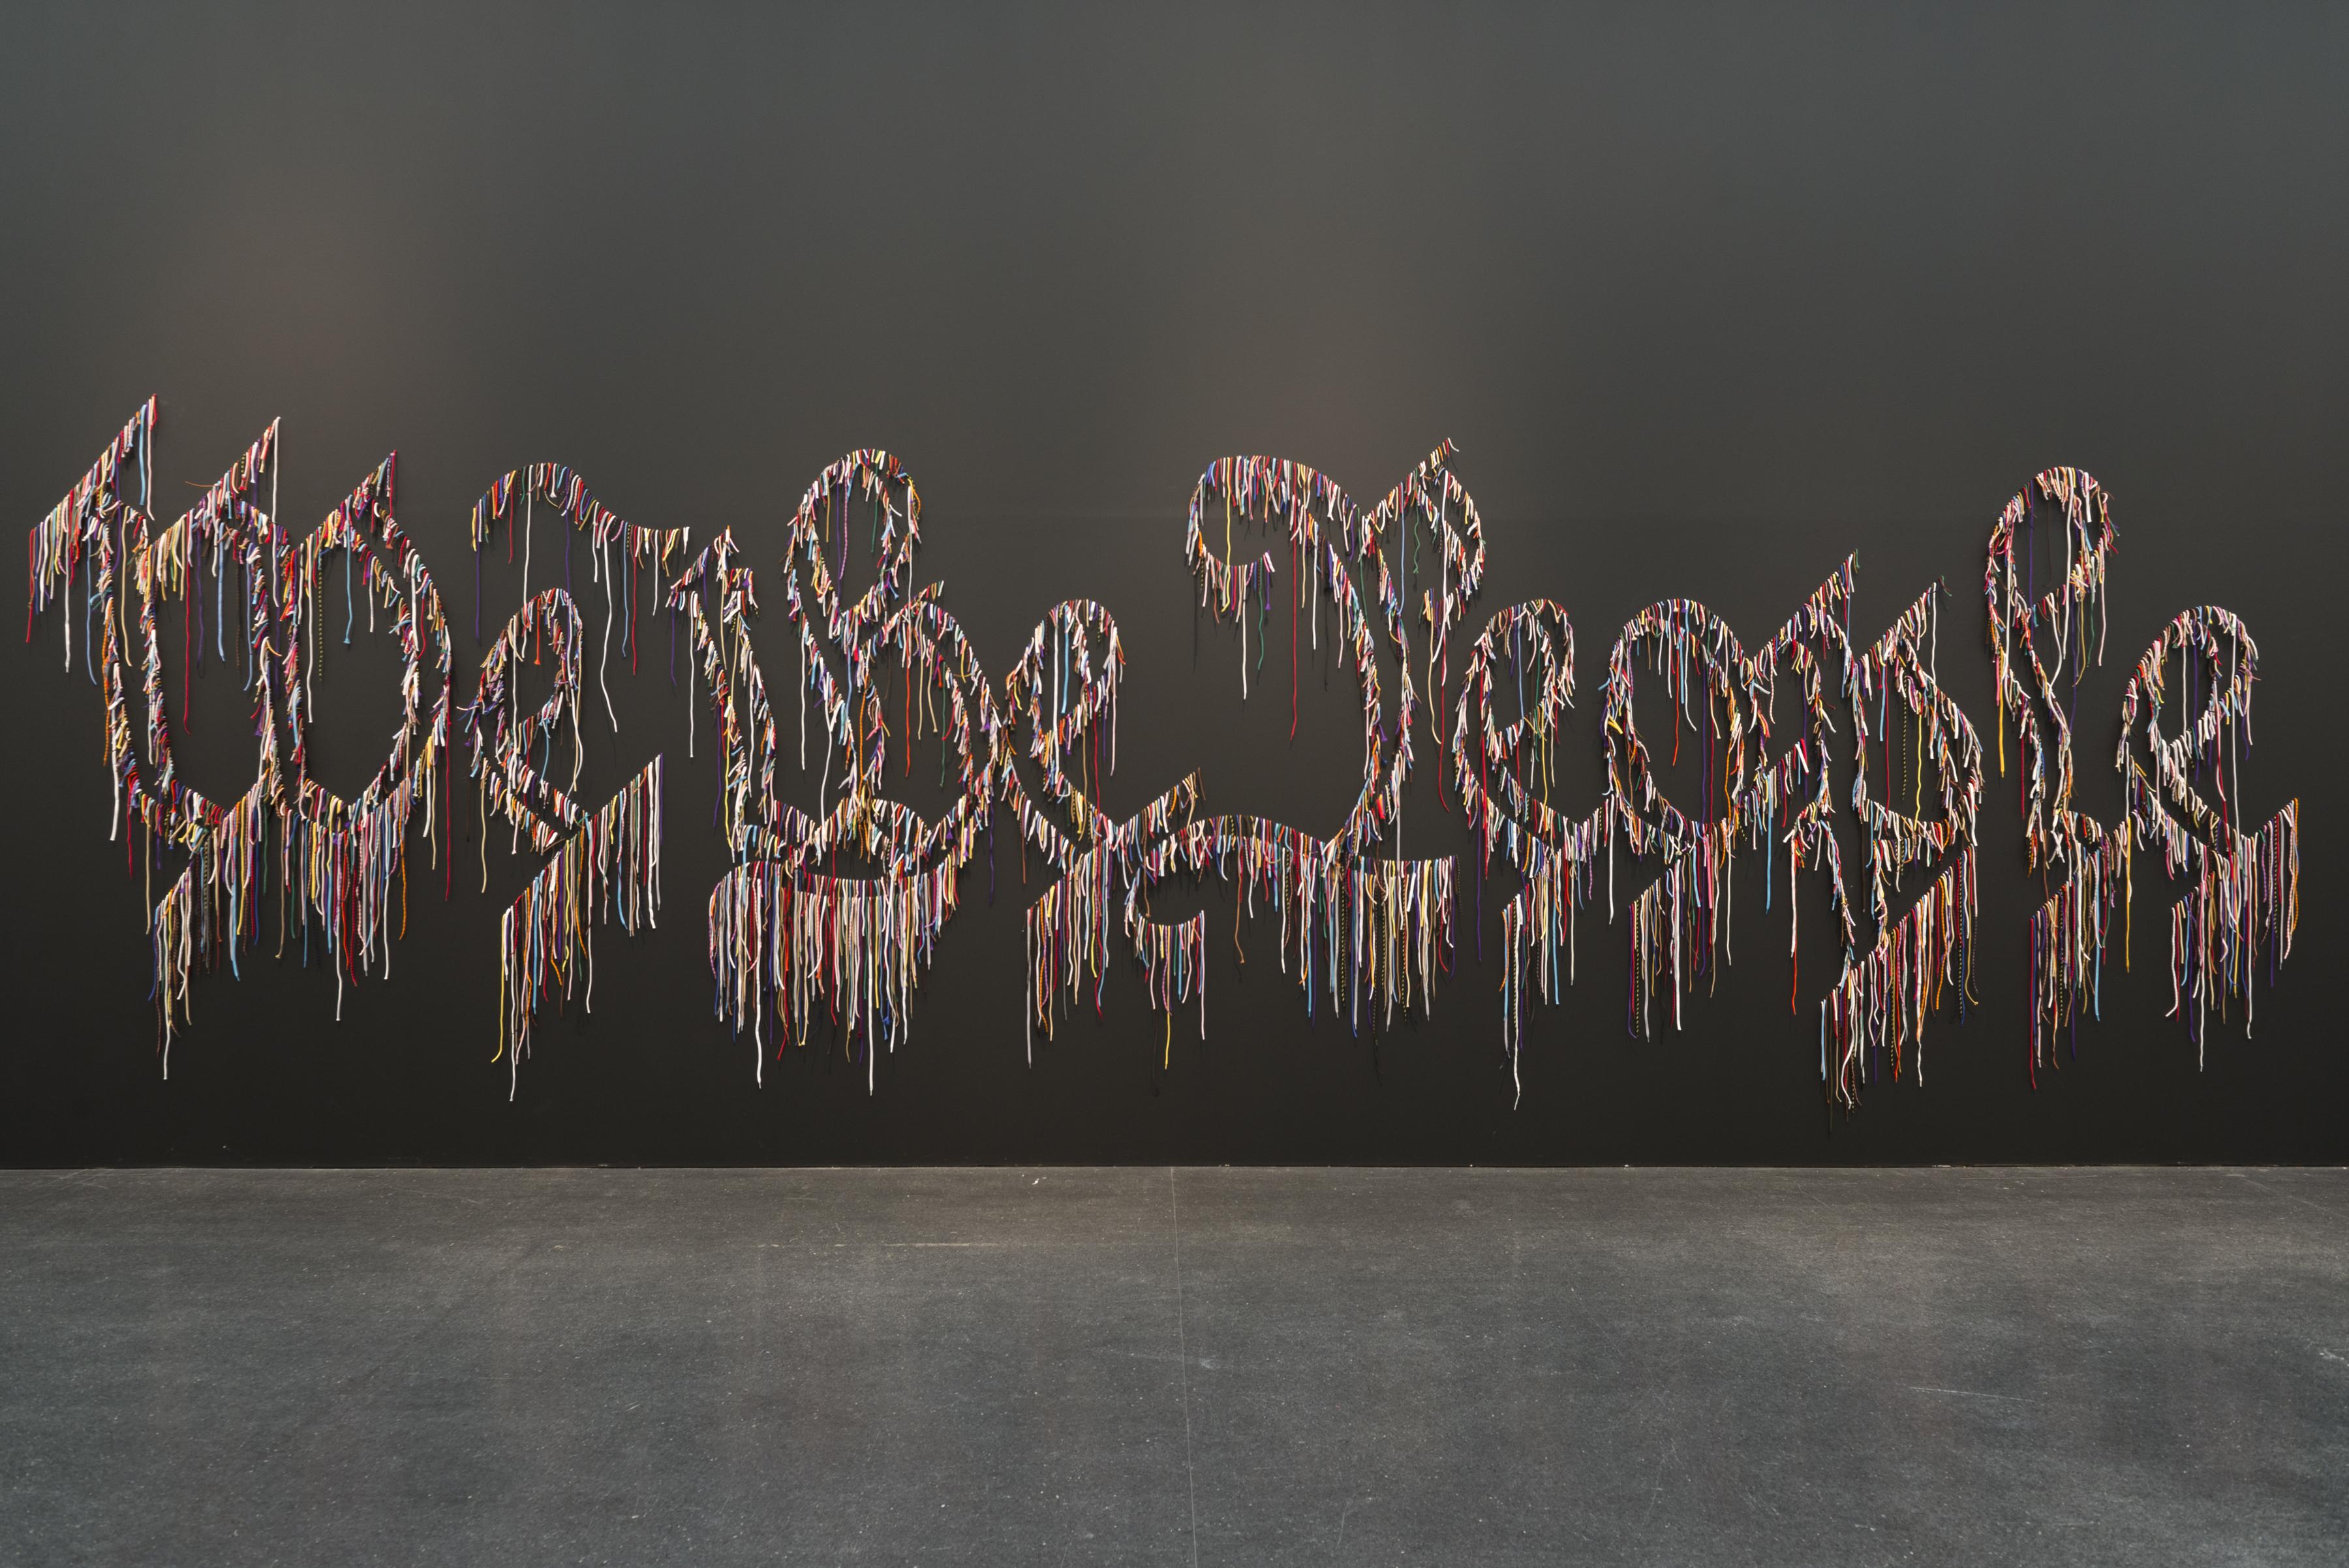 A multi-colored outline of Gothic-style letters spelling"We the People" is installed on a solid black wall. The letters appear to be dripping.